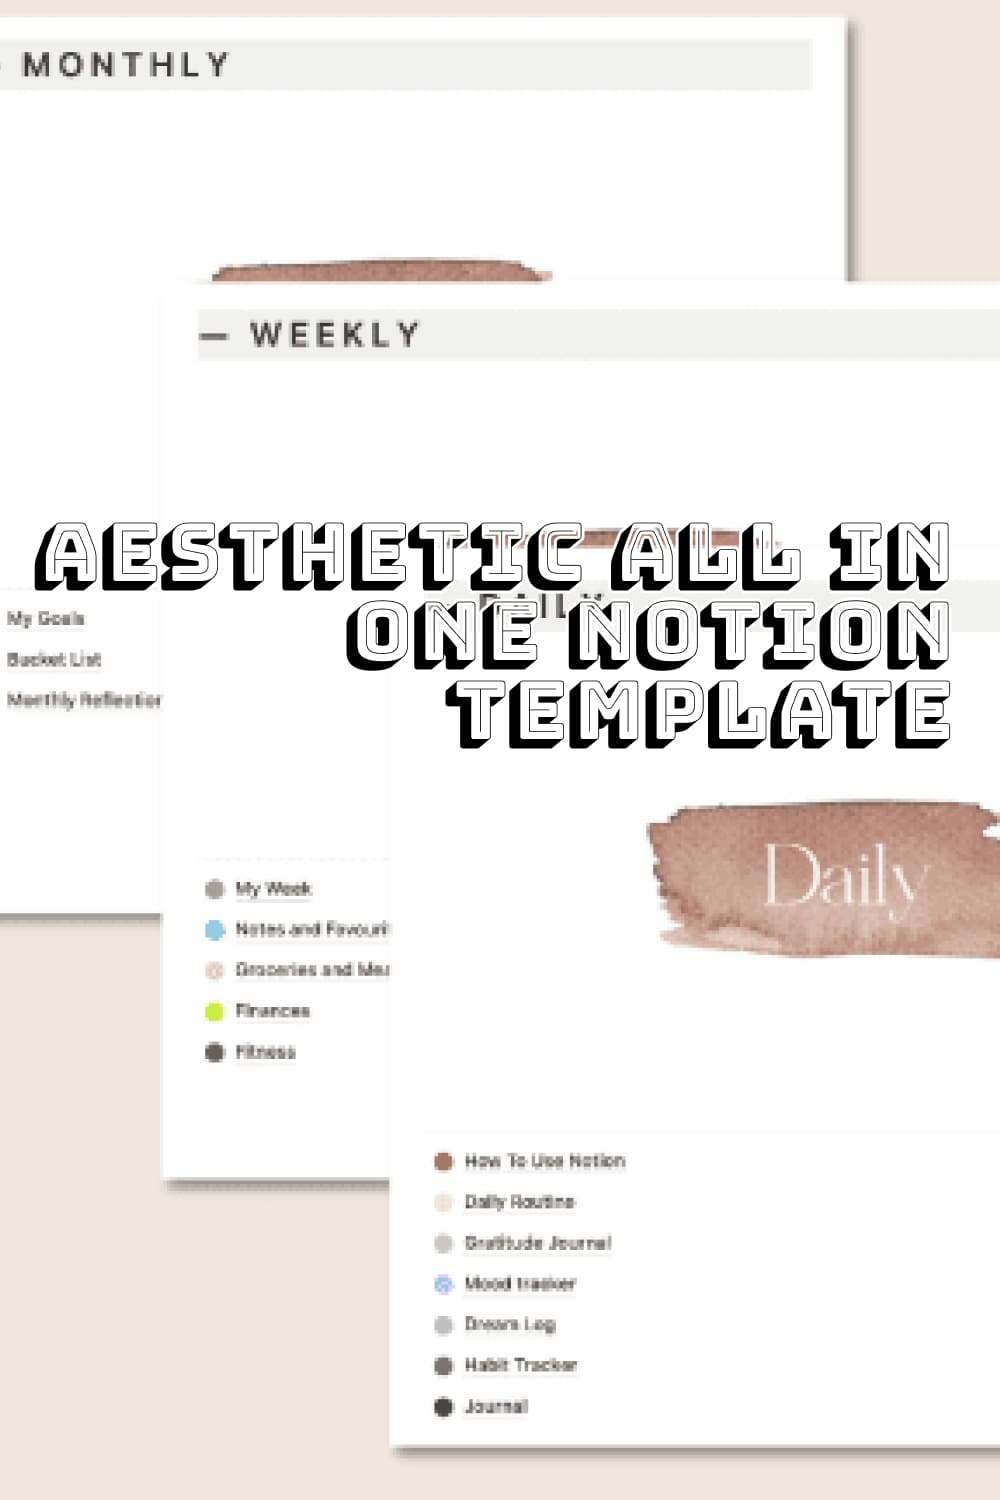 Aesthetic All In One Notion Template.